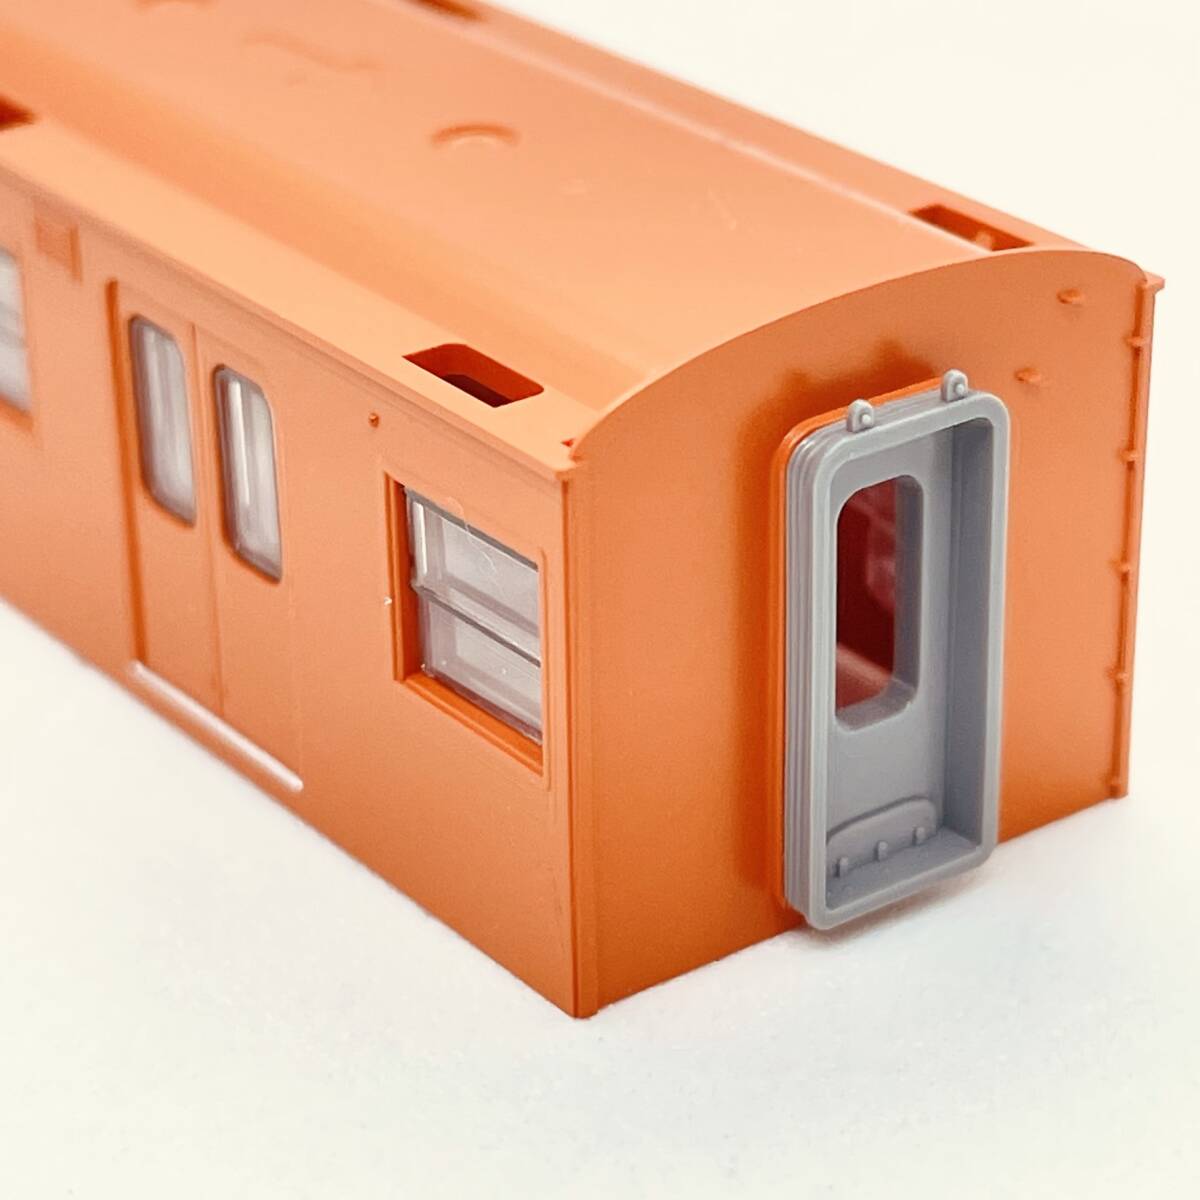 TOMIXmo is 102 unit sash car body + glass 1 both minute entering 97940/98455 JR103 series commuting train (JR west day main specification * orange ) set from rose si